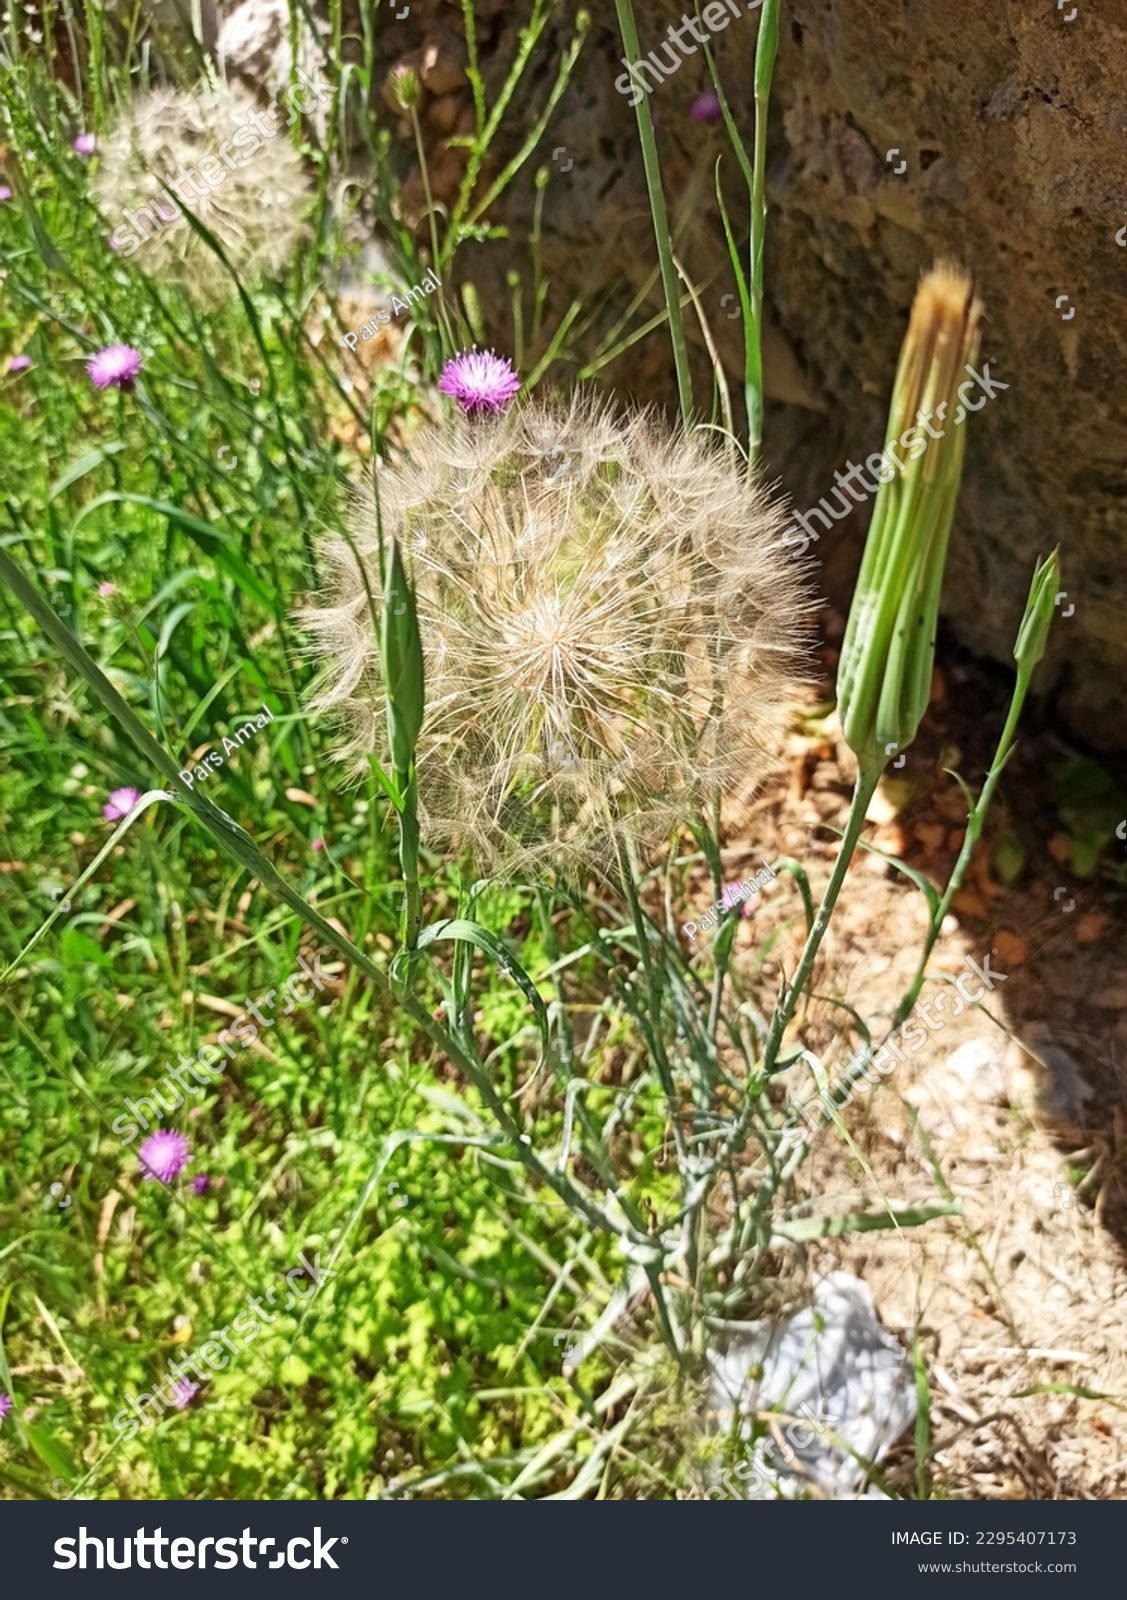 Dicots, salsifies, Tragopogon, Cichorieae, Cichorioideae, Asteraceae, Asterales, Asterids, Eudicots, Flowering plants, Vascular plants, Plants, Tragopogon porrifolius, Asteraceae, Asterales, eudicots #2295407173